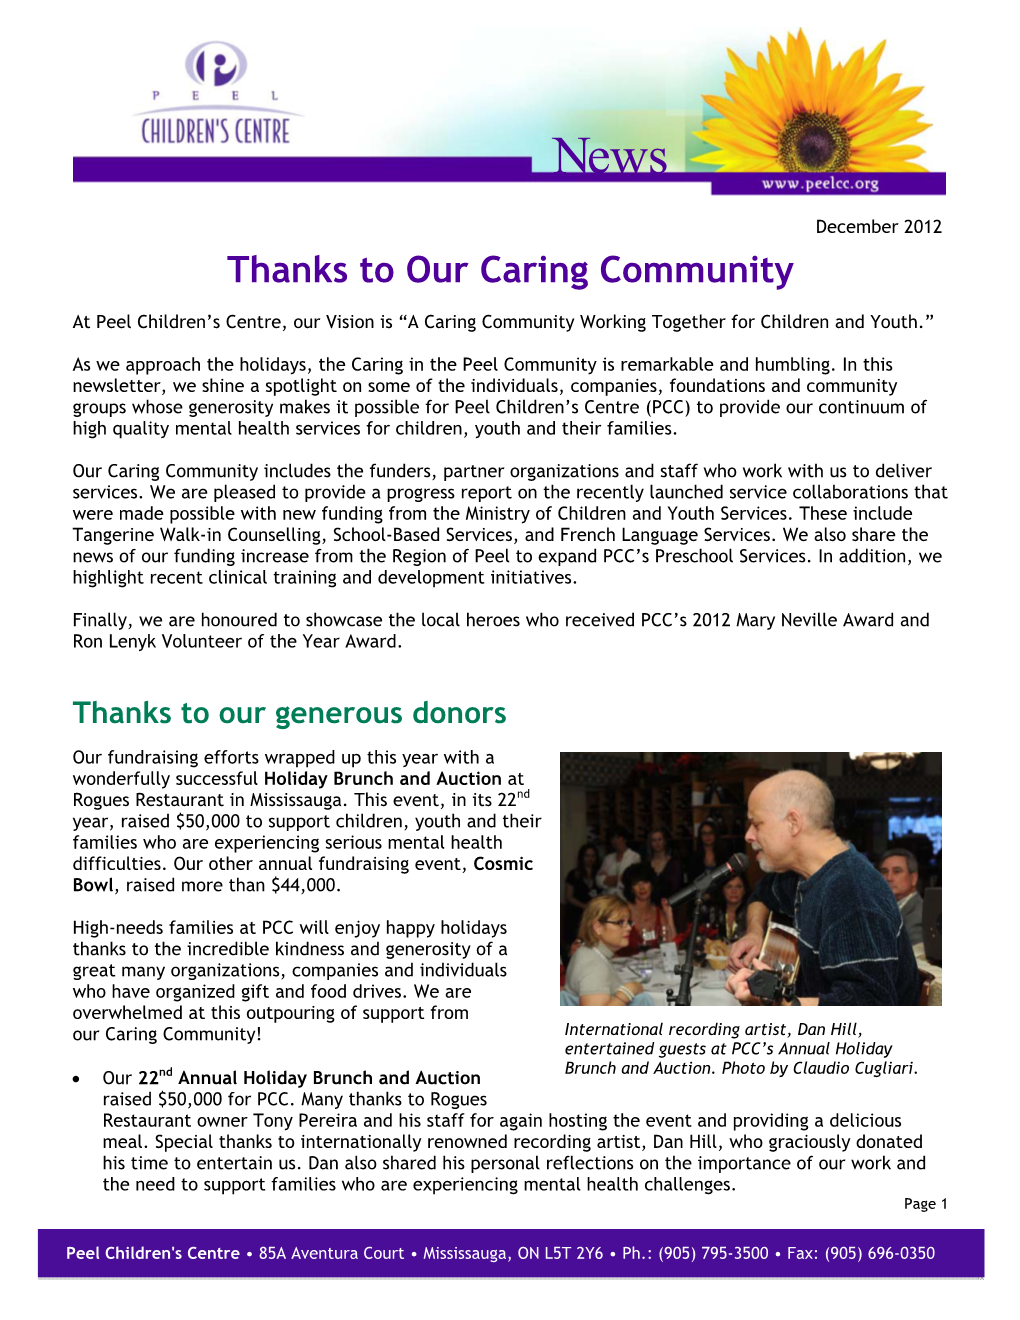 The Inaugural Edition of Our Electronic Newsletter